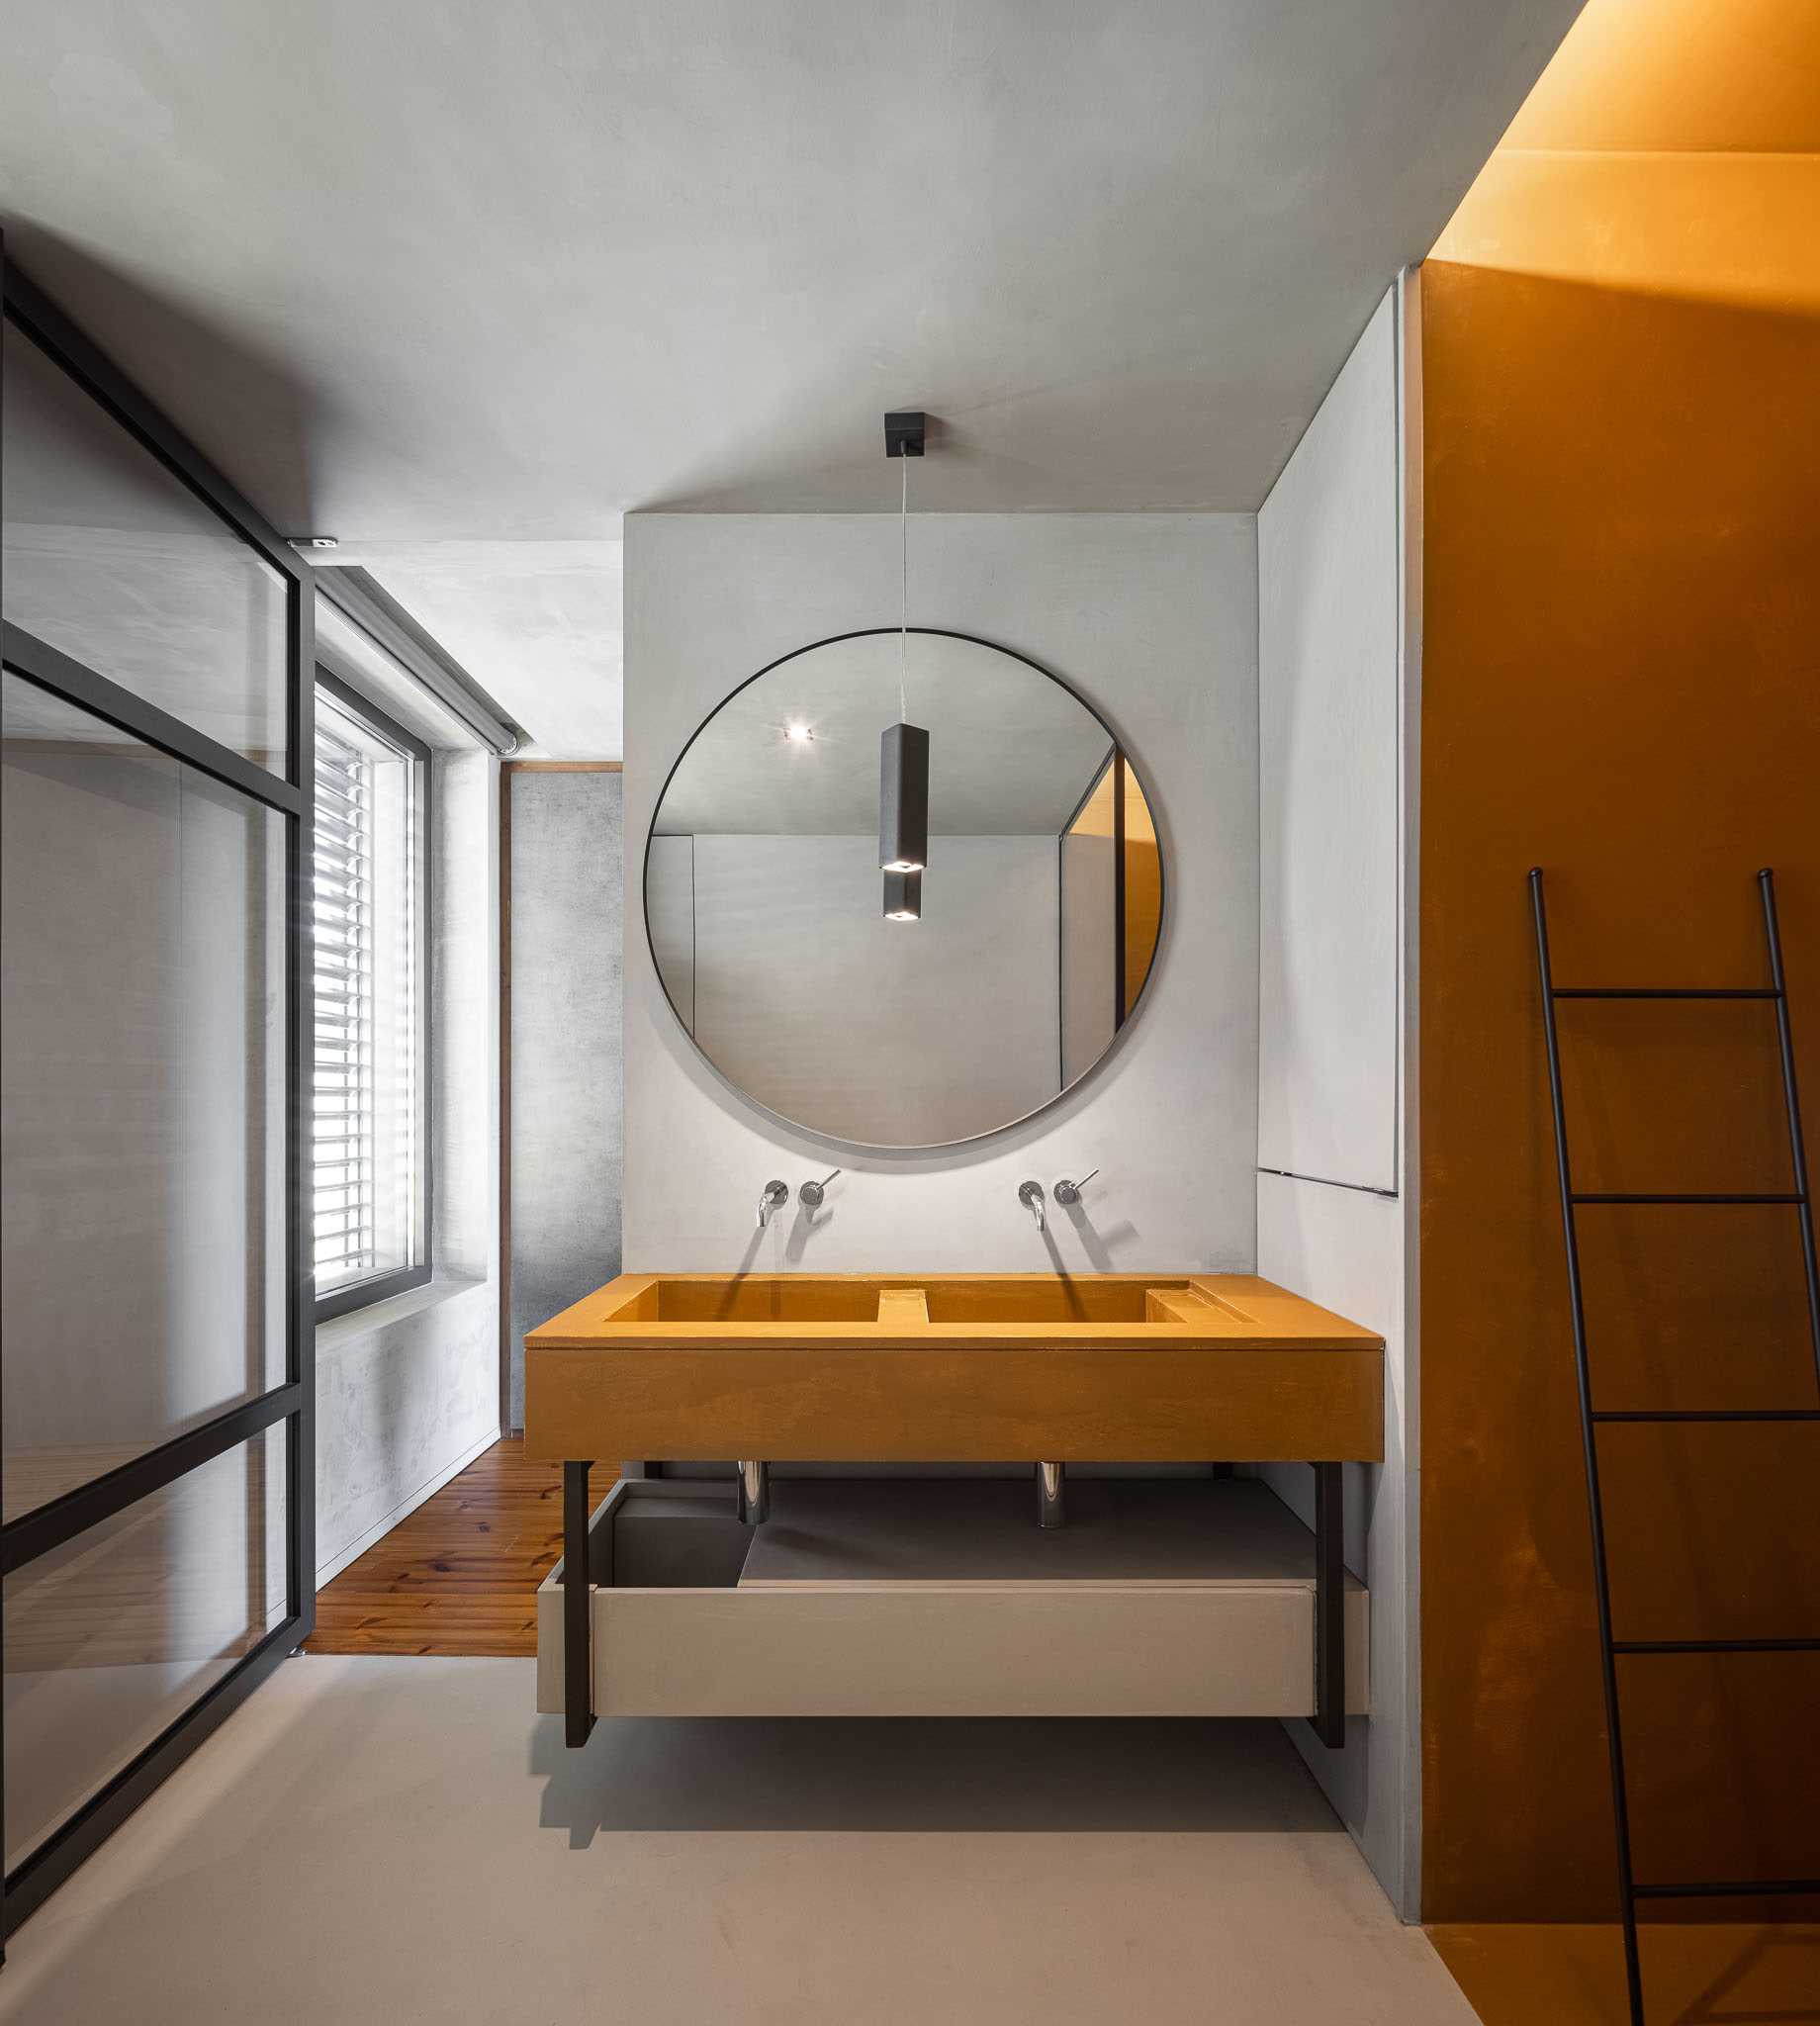 A modern bathroom with a double vanity and round mirror.